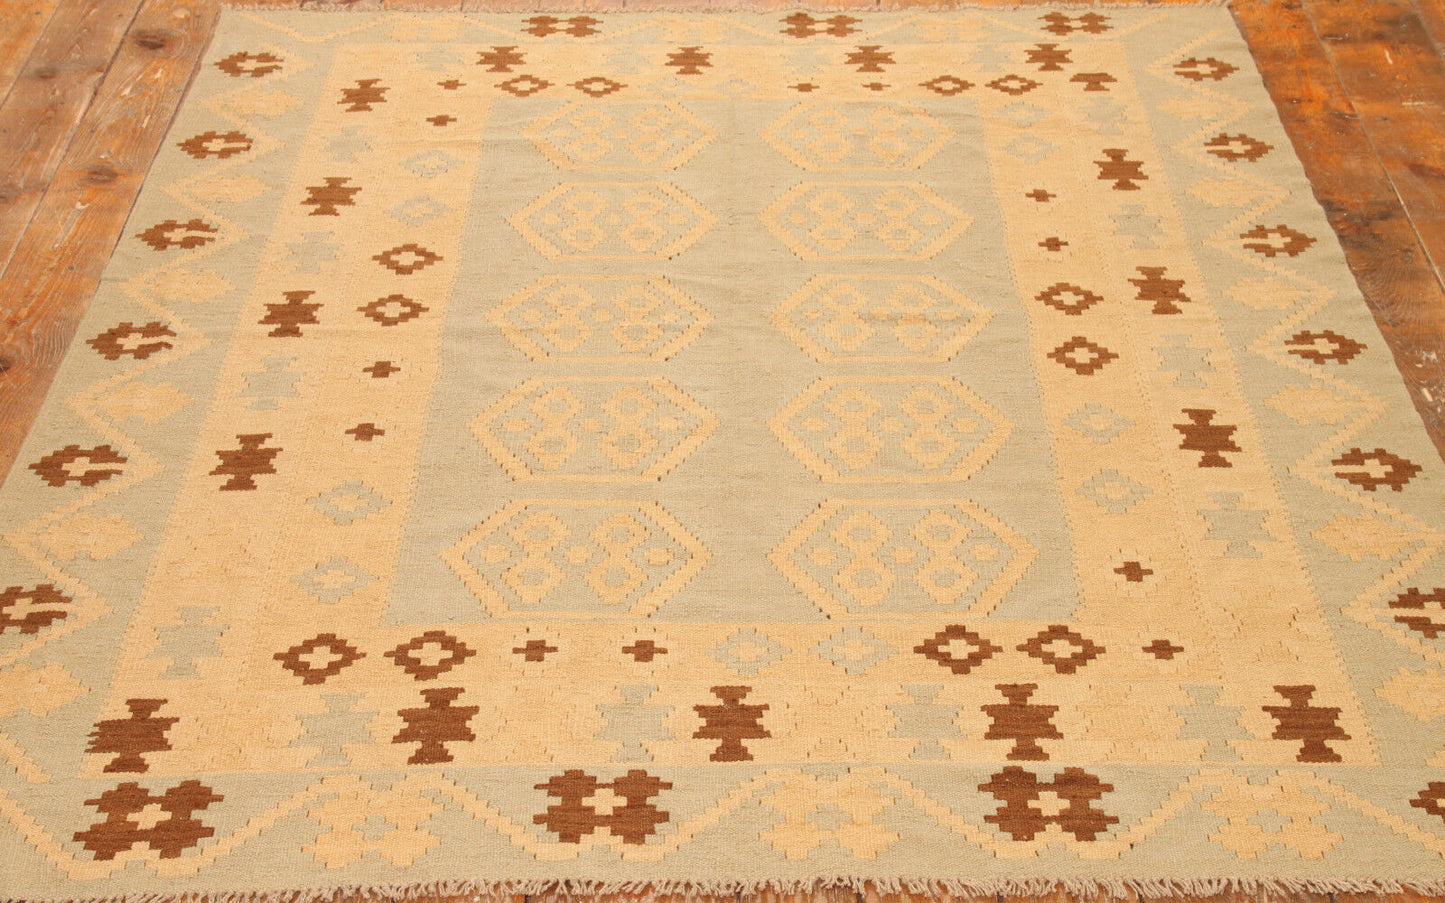 Close-up of the delicate blend of grey and beige colors on the Handmade Vintage Afghan Flatweave Kilim